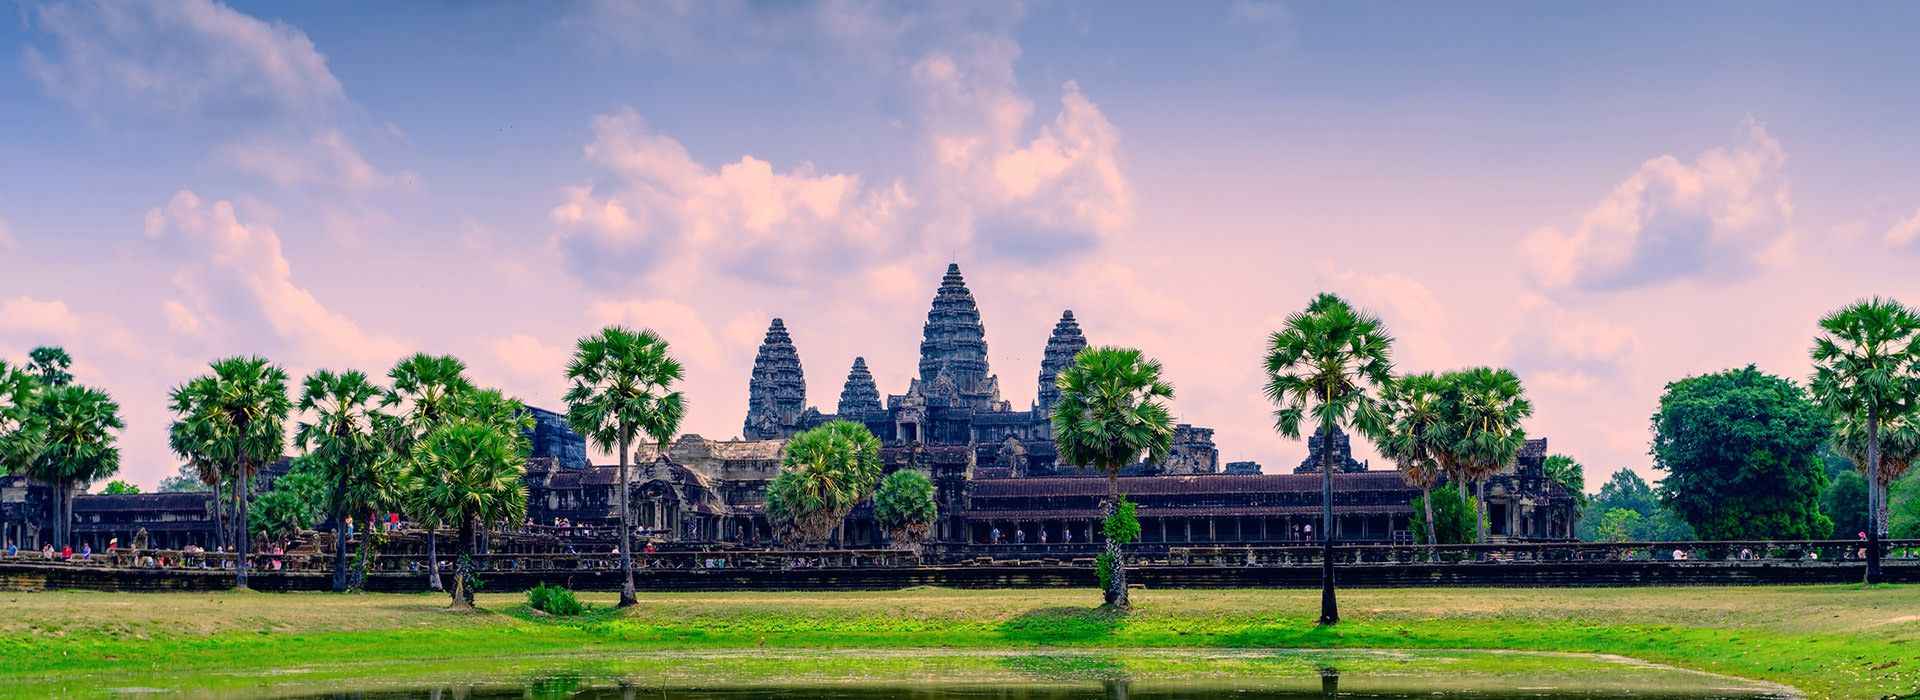 Cambodia Travel Guide - Travel Insights and Tips